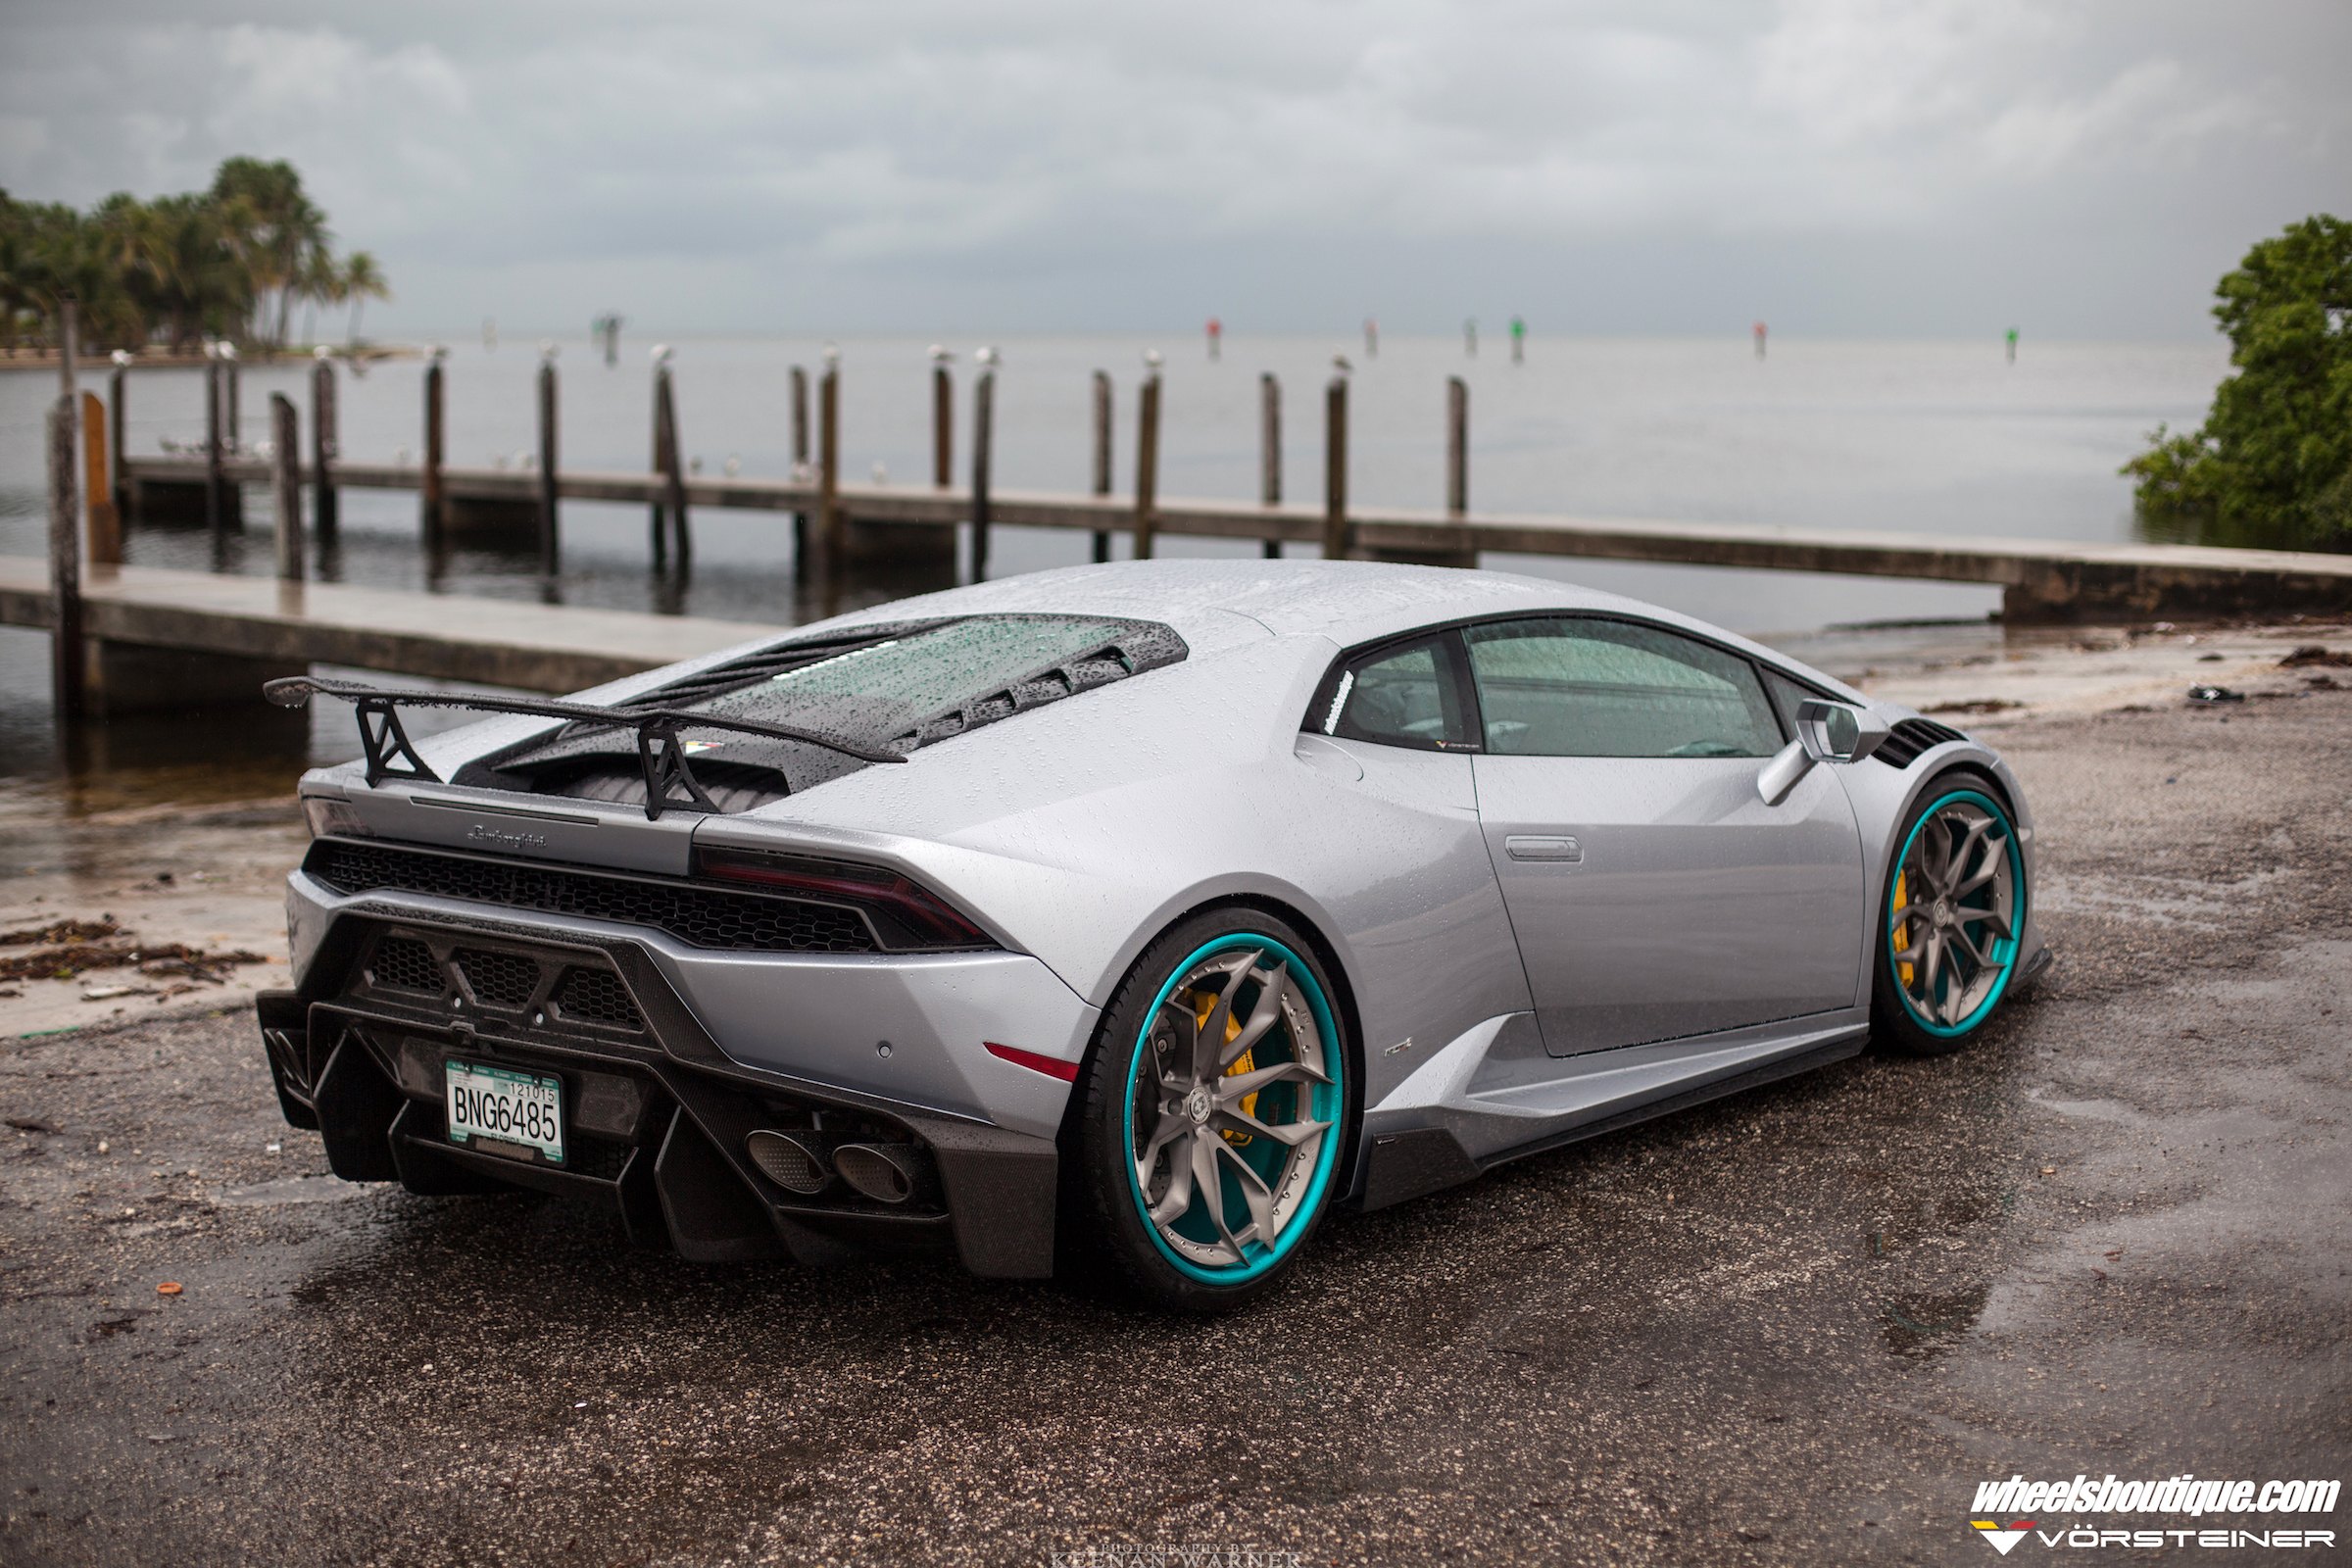 Gray Lamborghini Huracan with Large Wing Spoiler - Photo by Vorstiner